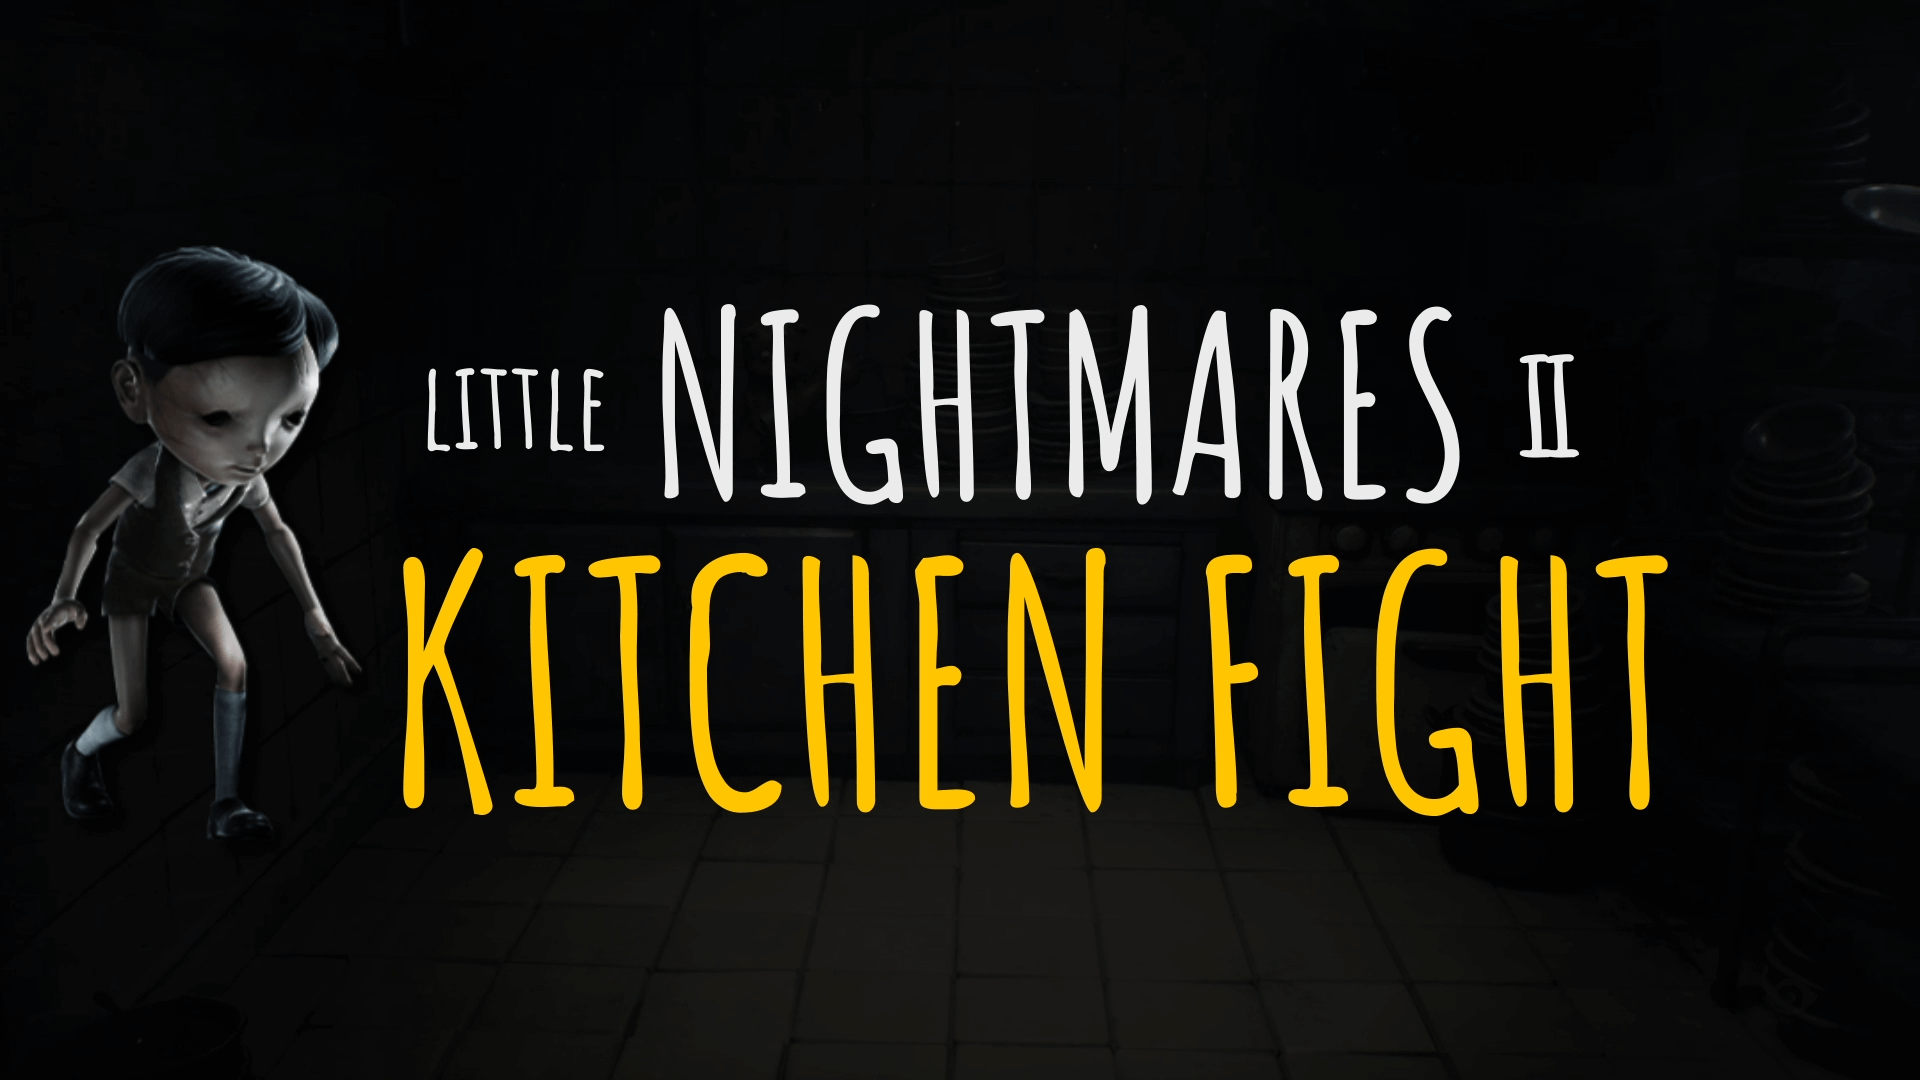 Little Nightmares 2 Kitchen Fight and Cafeteria Walkthrough